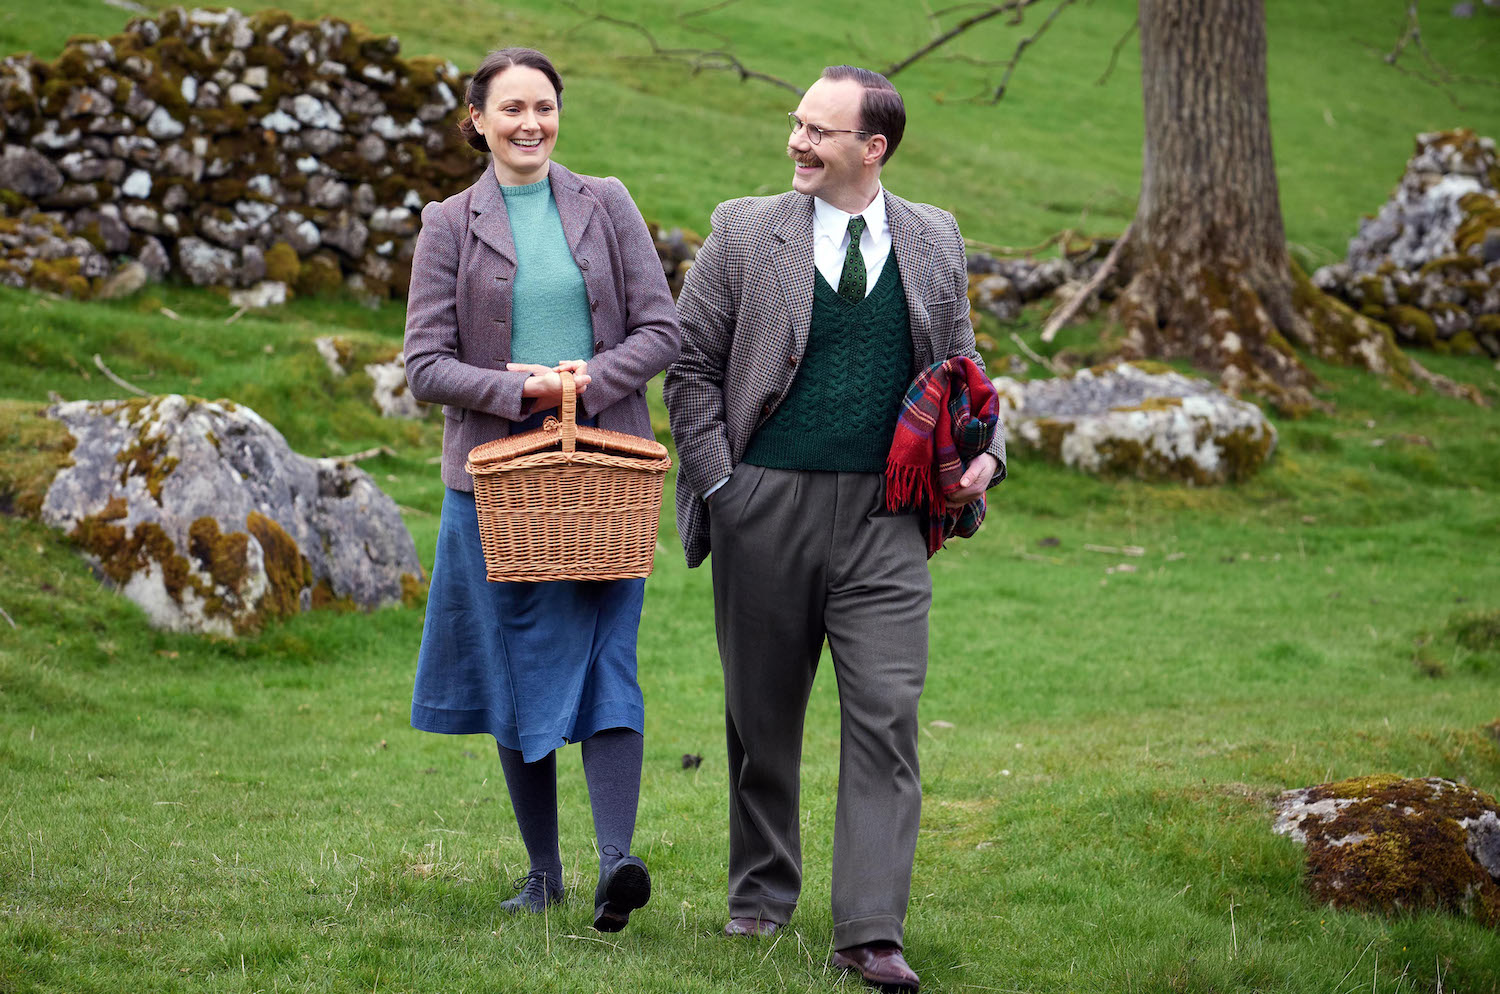 Picture shows: Mrs. Hall (Anna Madeley) and Gerald Hammon (Will Thorp) walk across a green field, with drystone walls, rocks, and a tree in the background. Mrs. Hall carries a picnic basket and Geral carries a folded rug. They both look very happy.